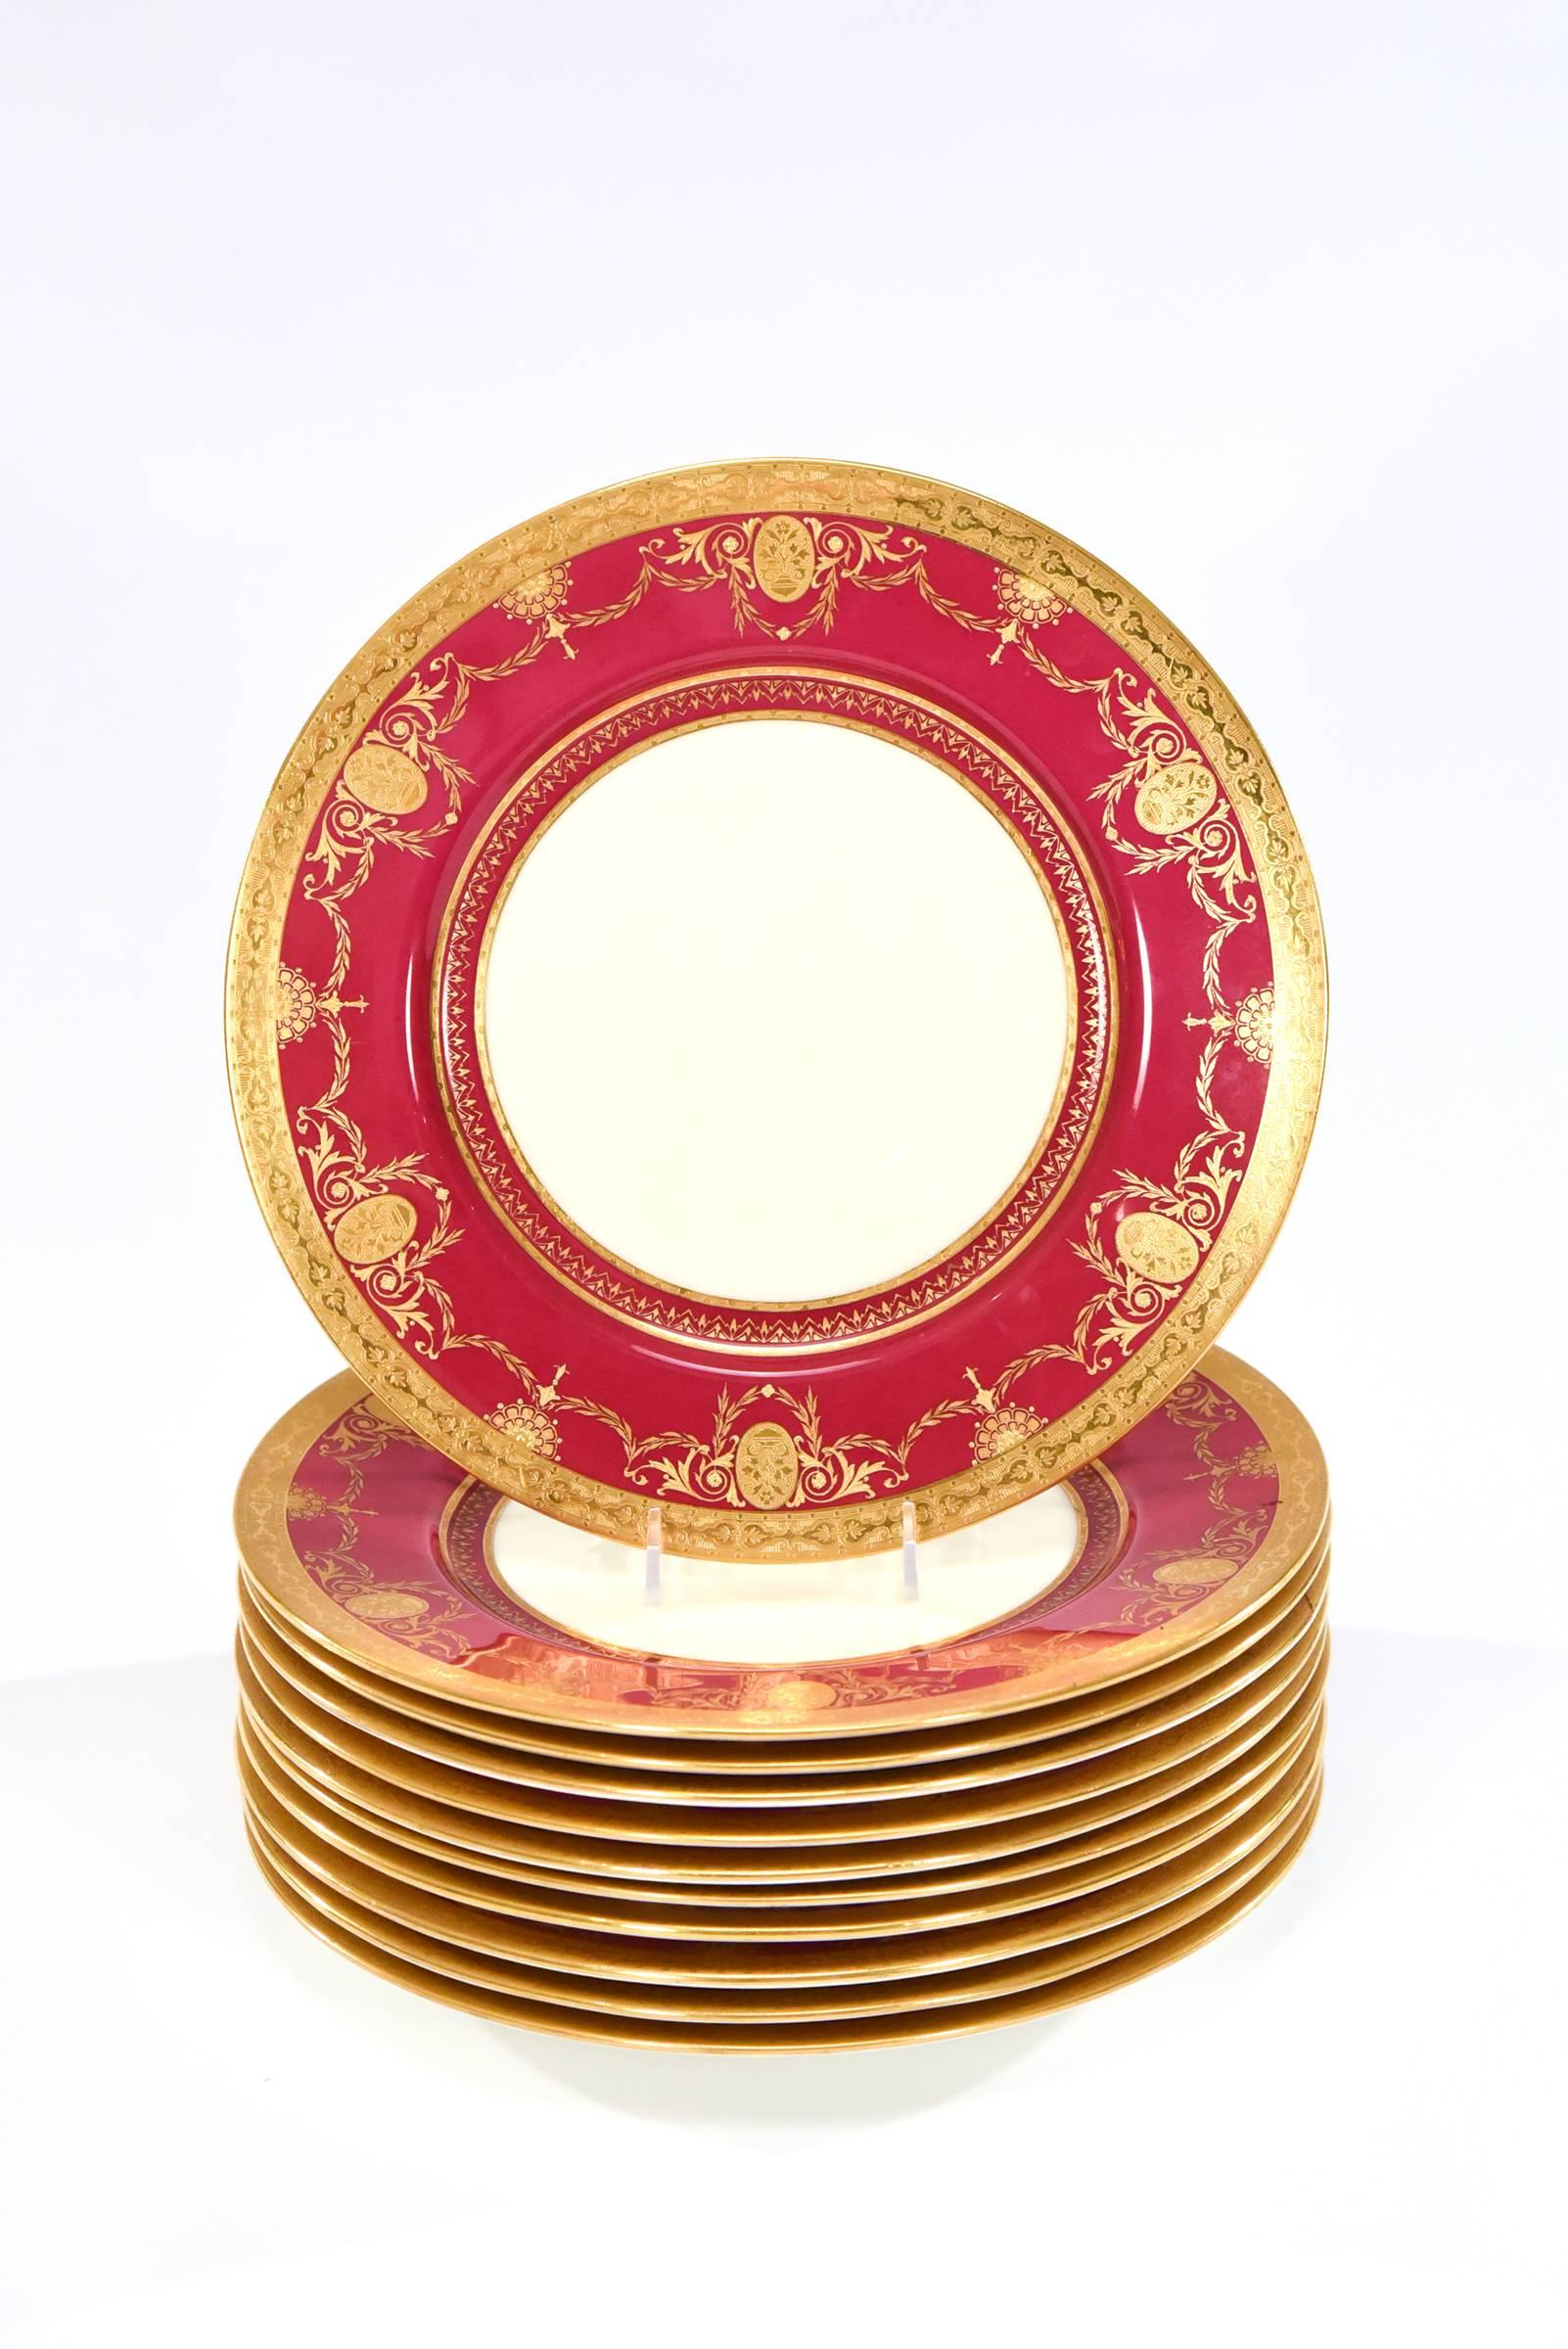 It is rare to find antique china plates that measure more than 11" in diameter but this exquisite Minton set of 11, does just that. The elegant cranberry border is embellished with an acid etched gold border and raised paste gold neoclassical